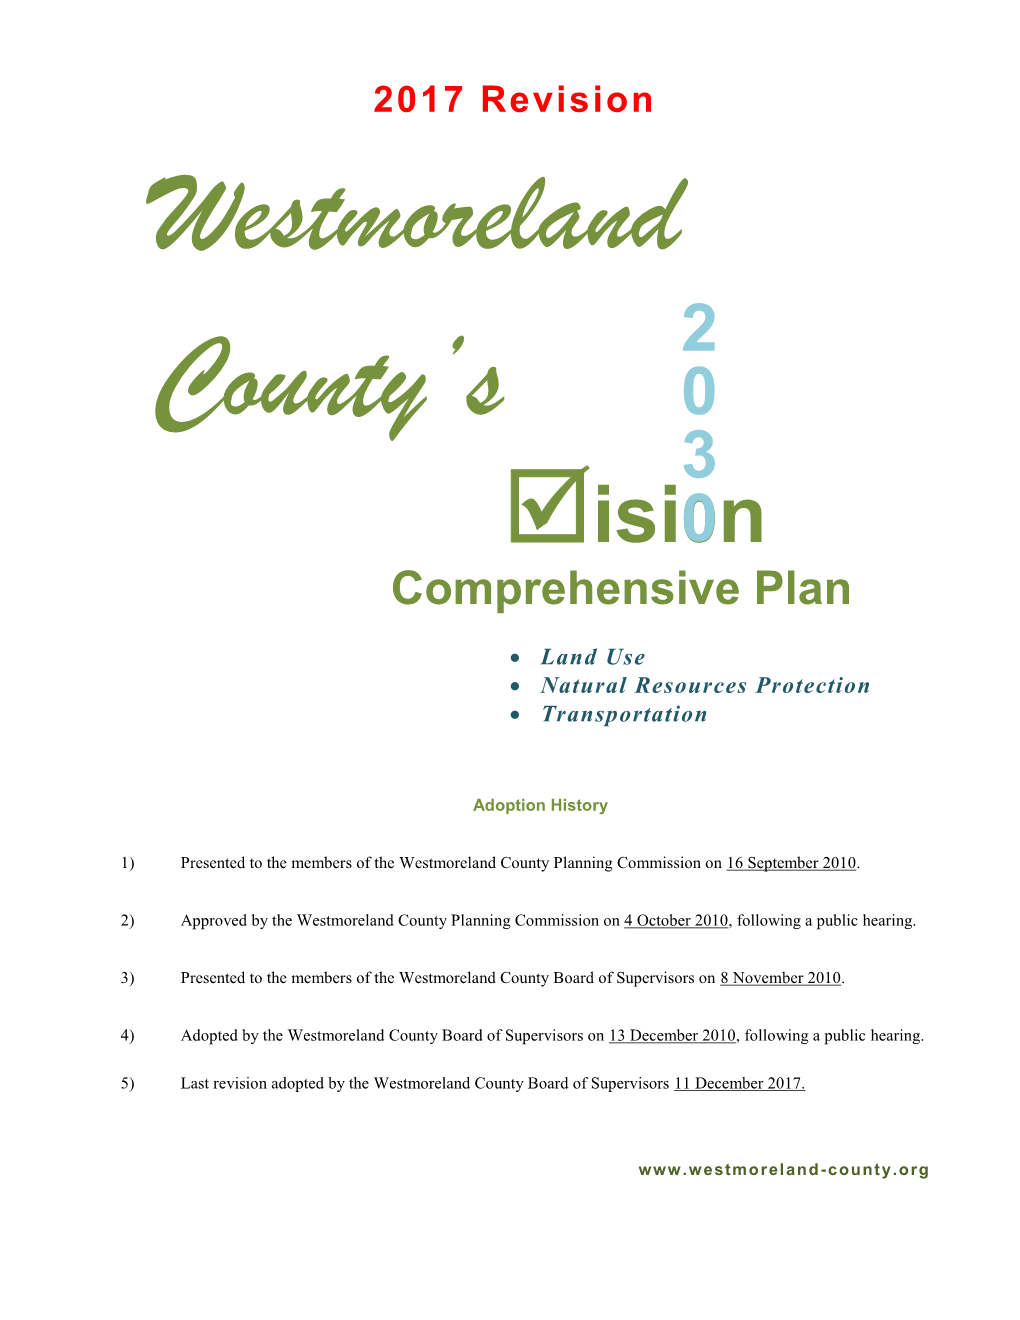 Westmoreland County Comprehensive Plan, Submitted to the Westmoreland Courthouse